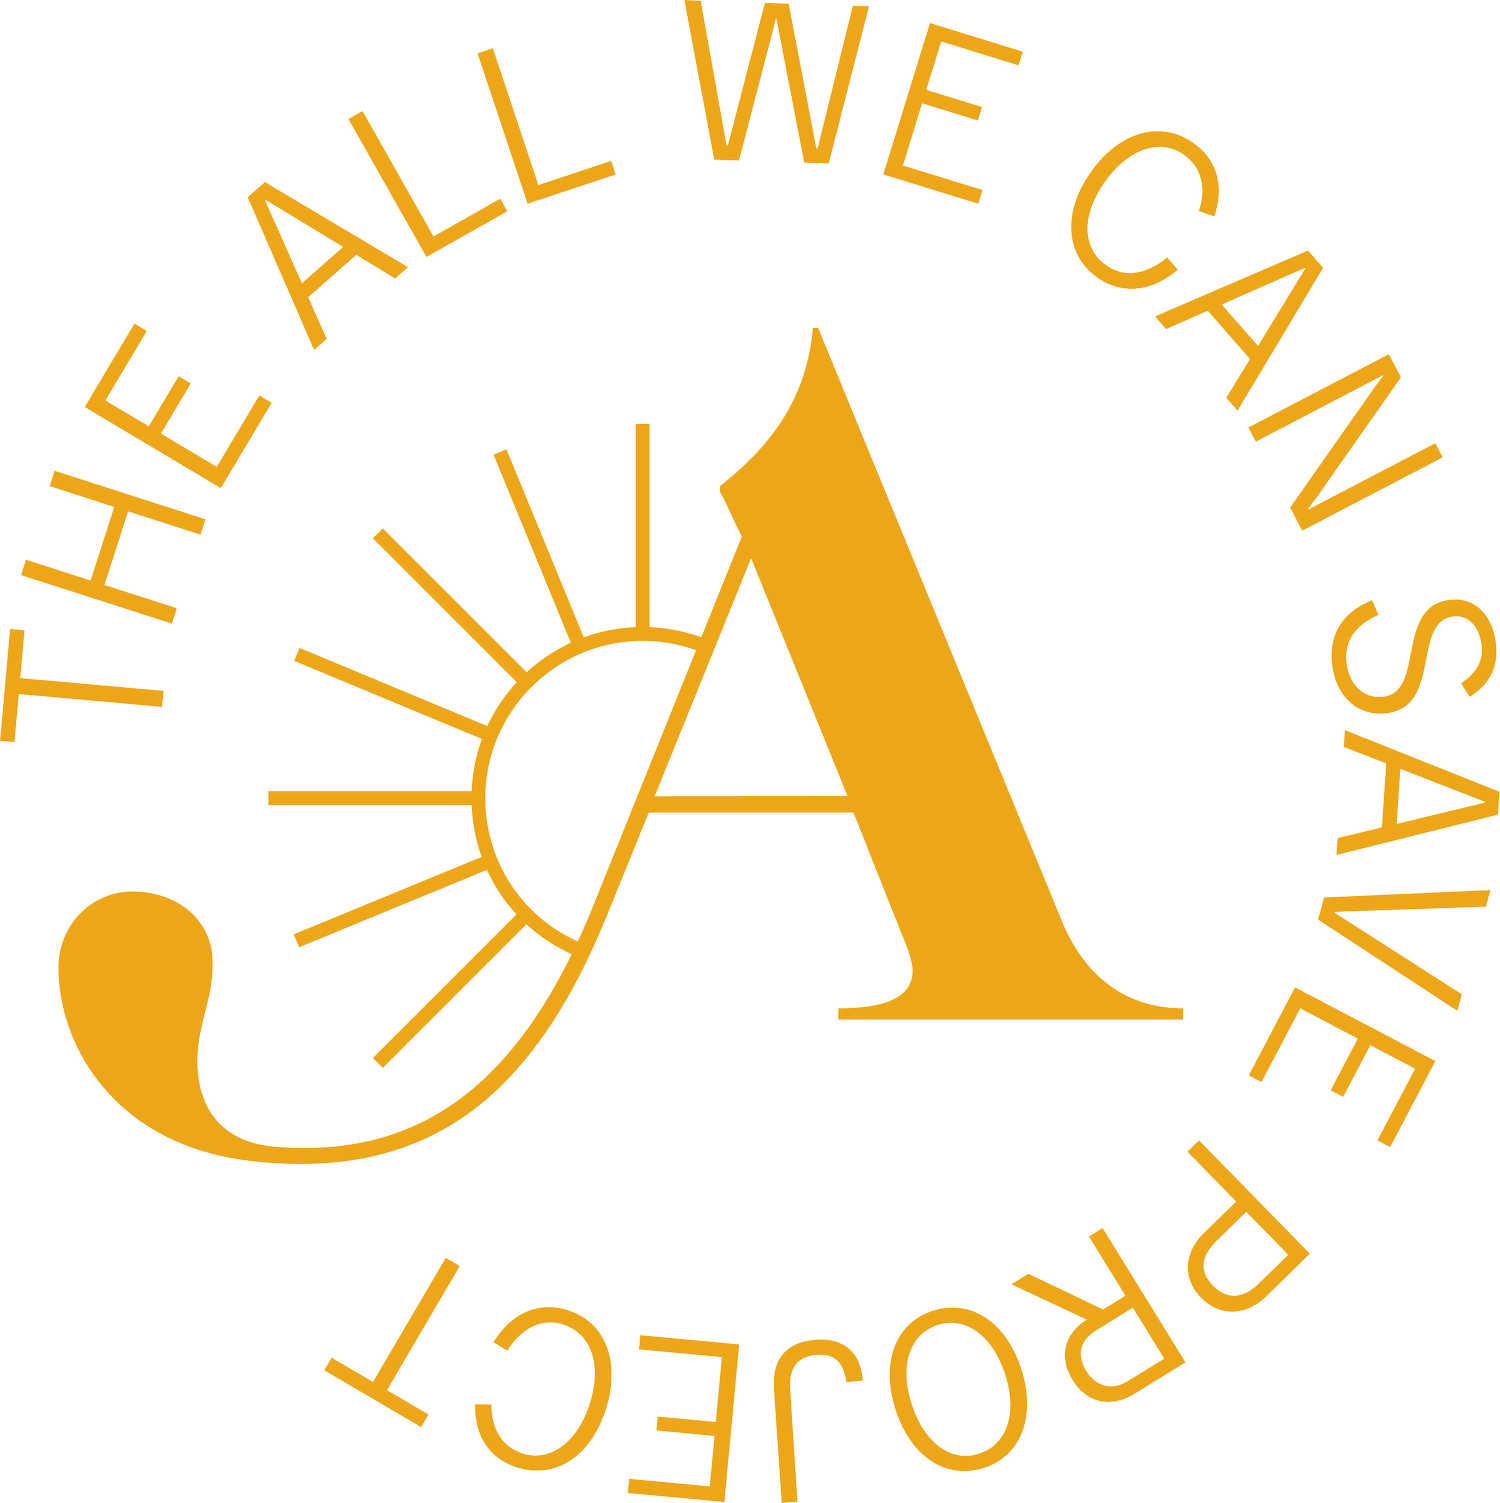 The All We Can Save Project